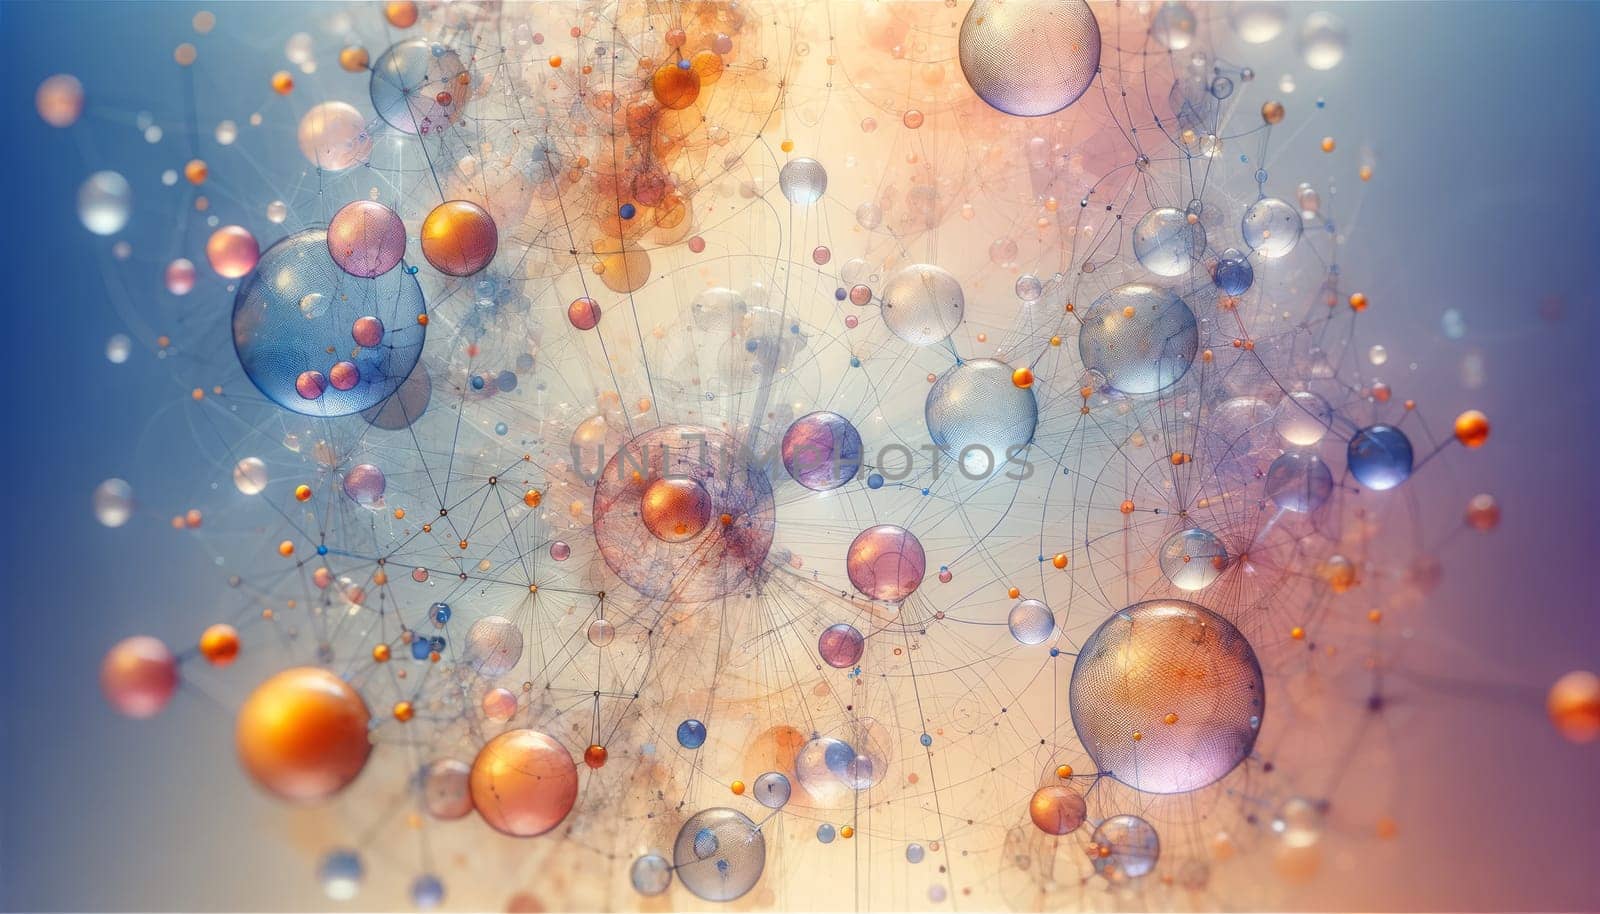 A wide digital illustration featuring an abstract network of interconnected lines and floating translucent orbs. The color palette is soft and pastel, with shades of orange, blue, purple, and gold. The orbs vary in size, with some larger and more opaque at the forefront and others smaller and more transparent in the background, creating a sense of depth. Fine lines connect the orbs in a web-like structure, suggesting complexity and connectivity in a light, airy space.